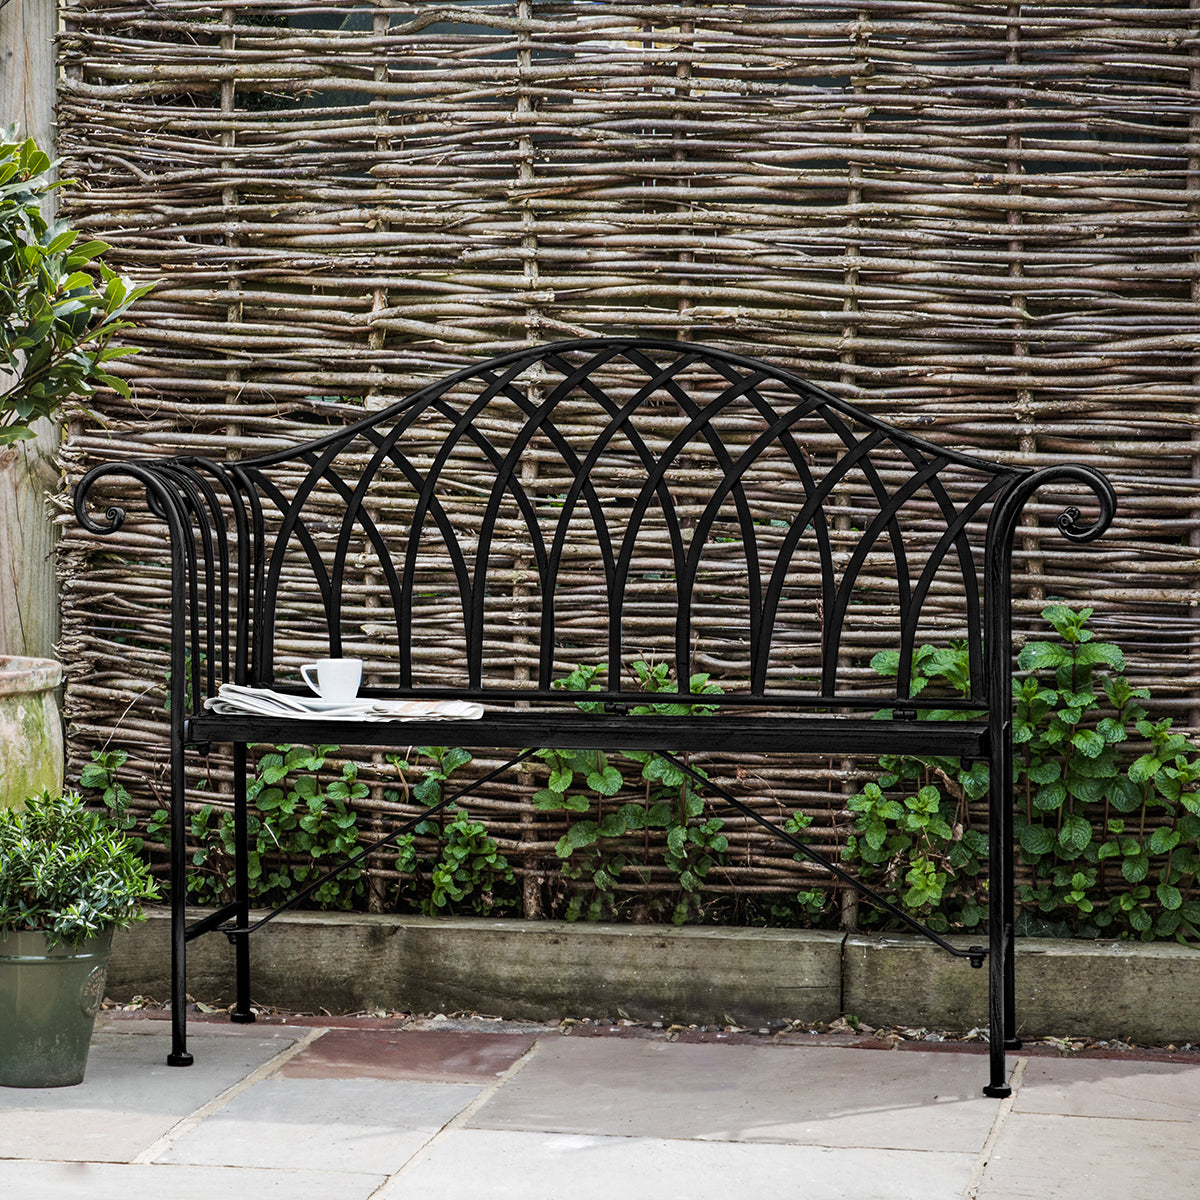 A Noss Outdoor Bench Noir by Kikiathome.co.uk enhances the garden with stylish home furniture.